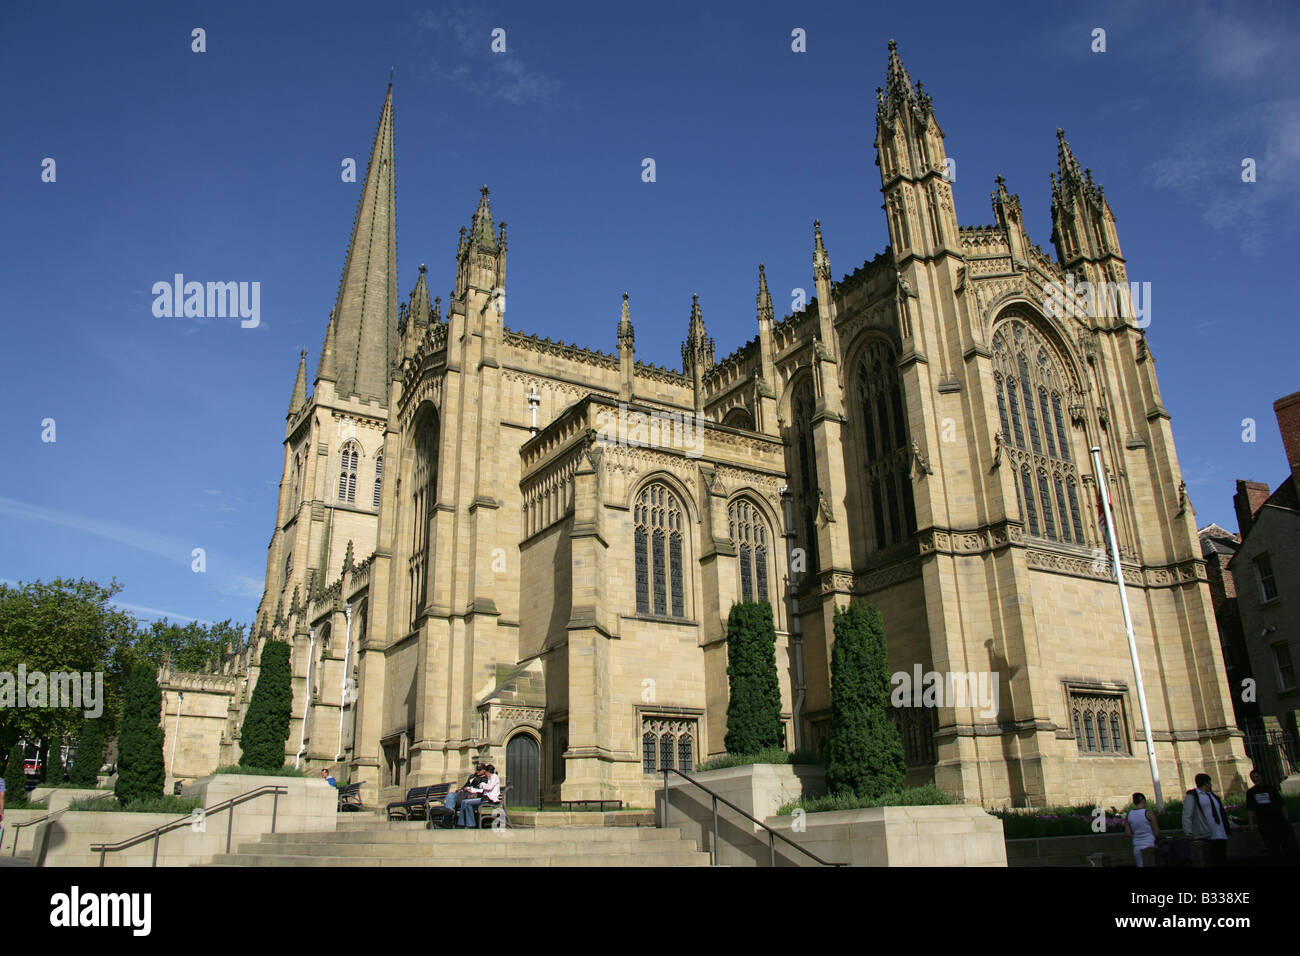 City of Wakefield, England. View of the south and east facade of Wakefield Cathedral. Located in Wakefield’s city centre. Stock Photo